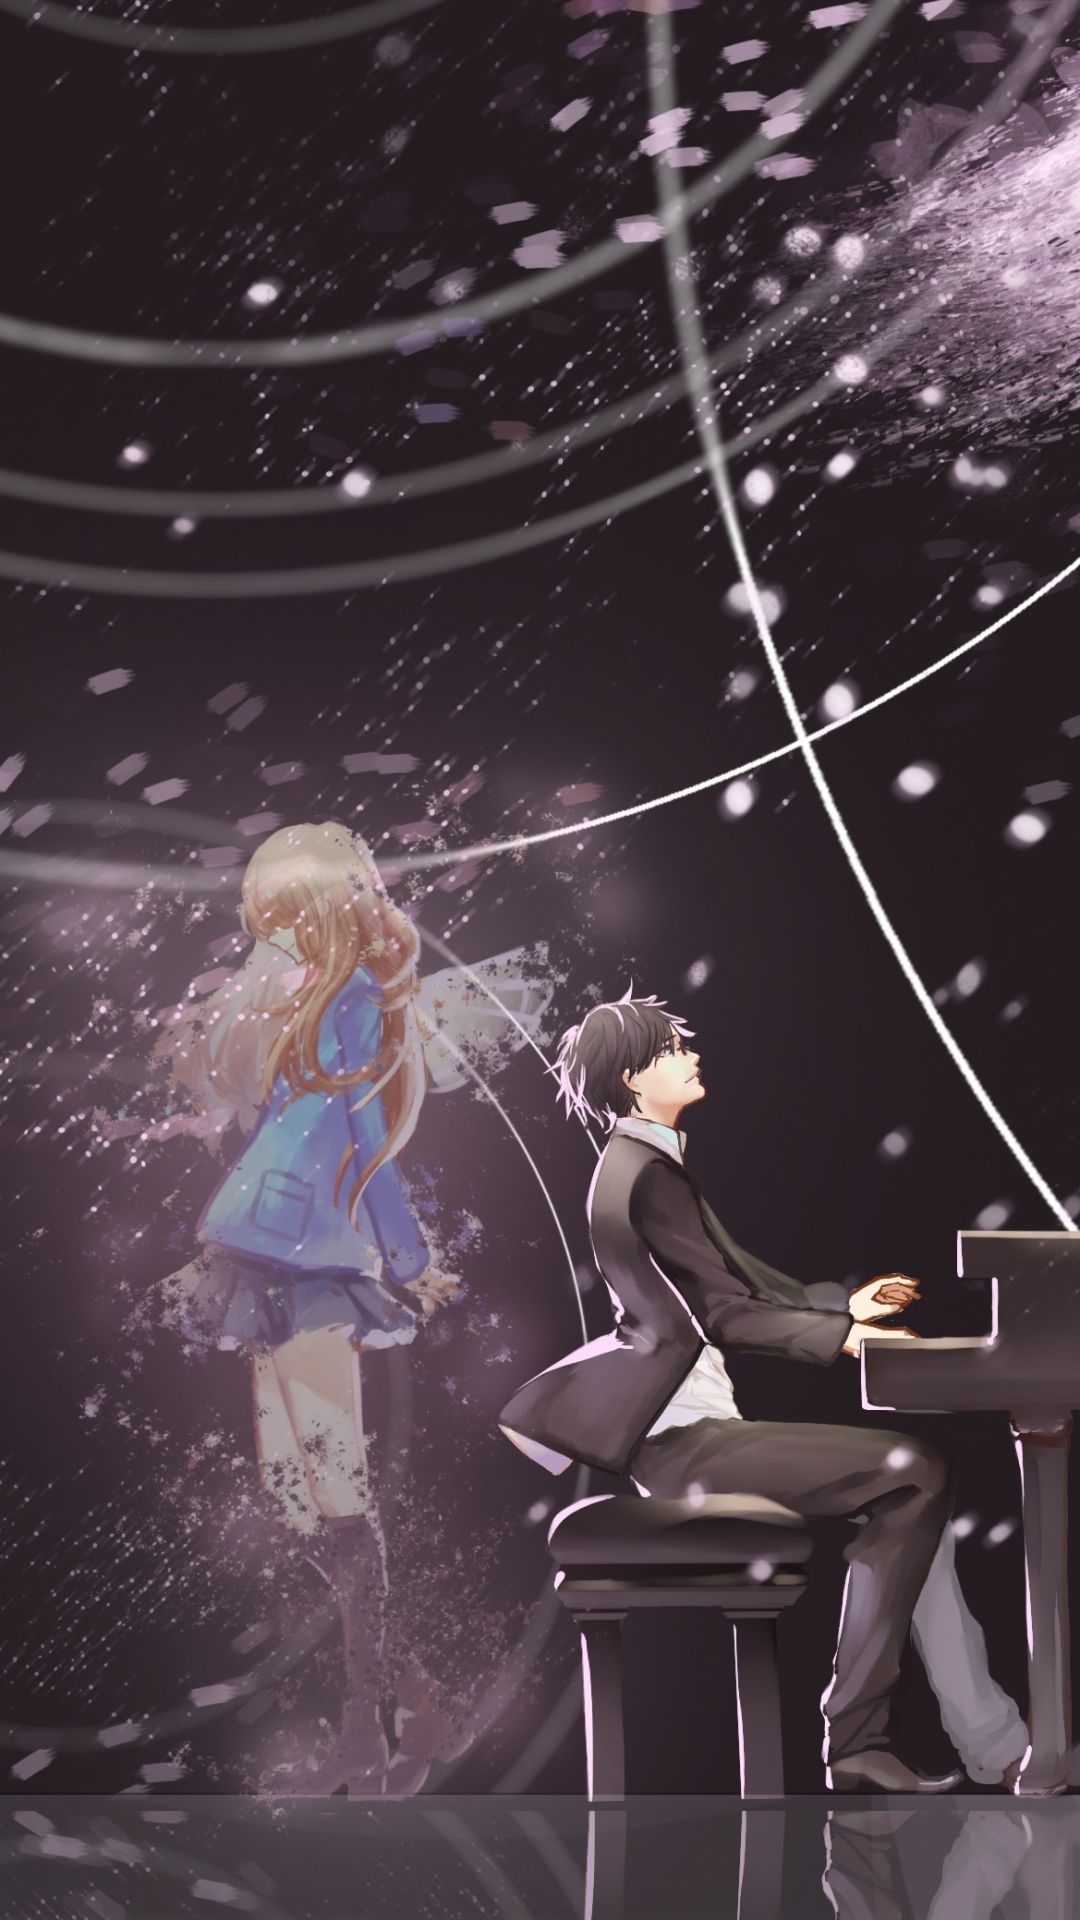 Your Lie In April Anime Hd Wallpapers - Wallpaper Cave